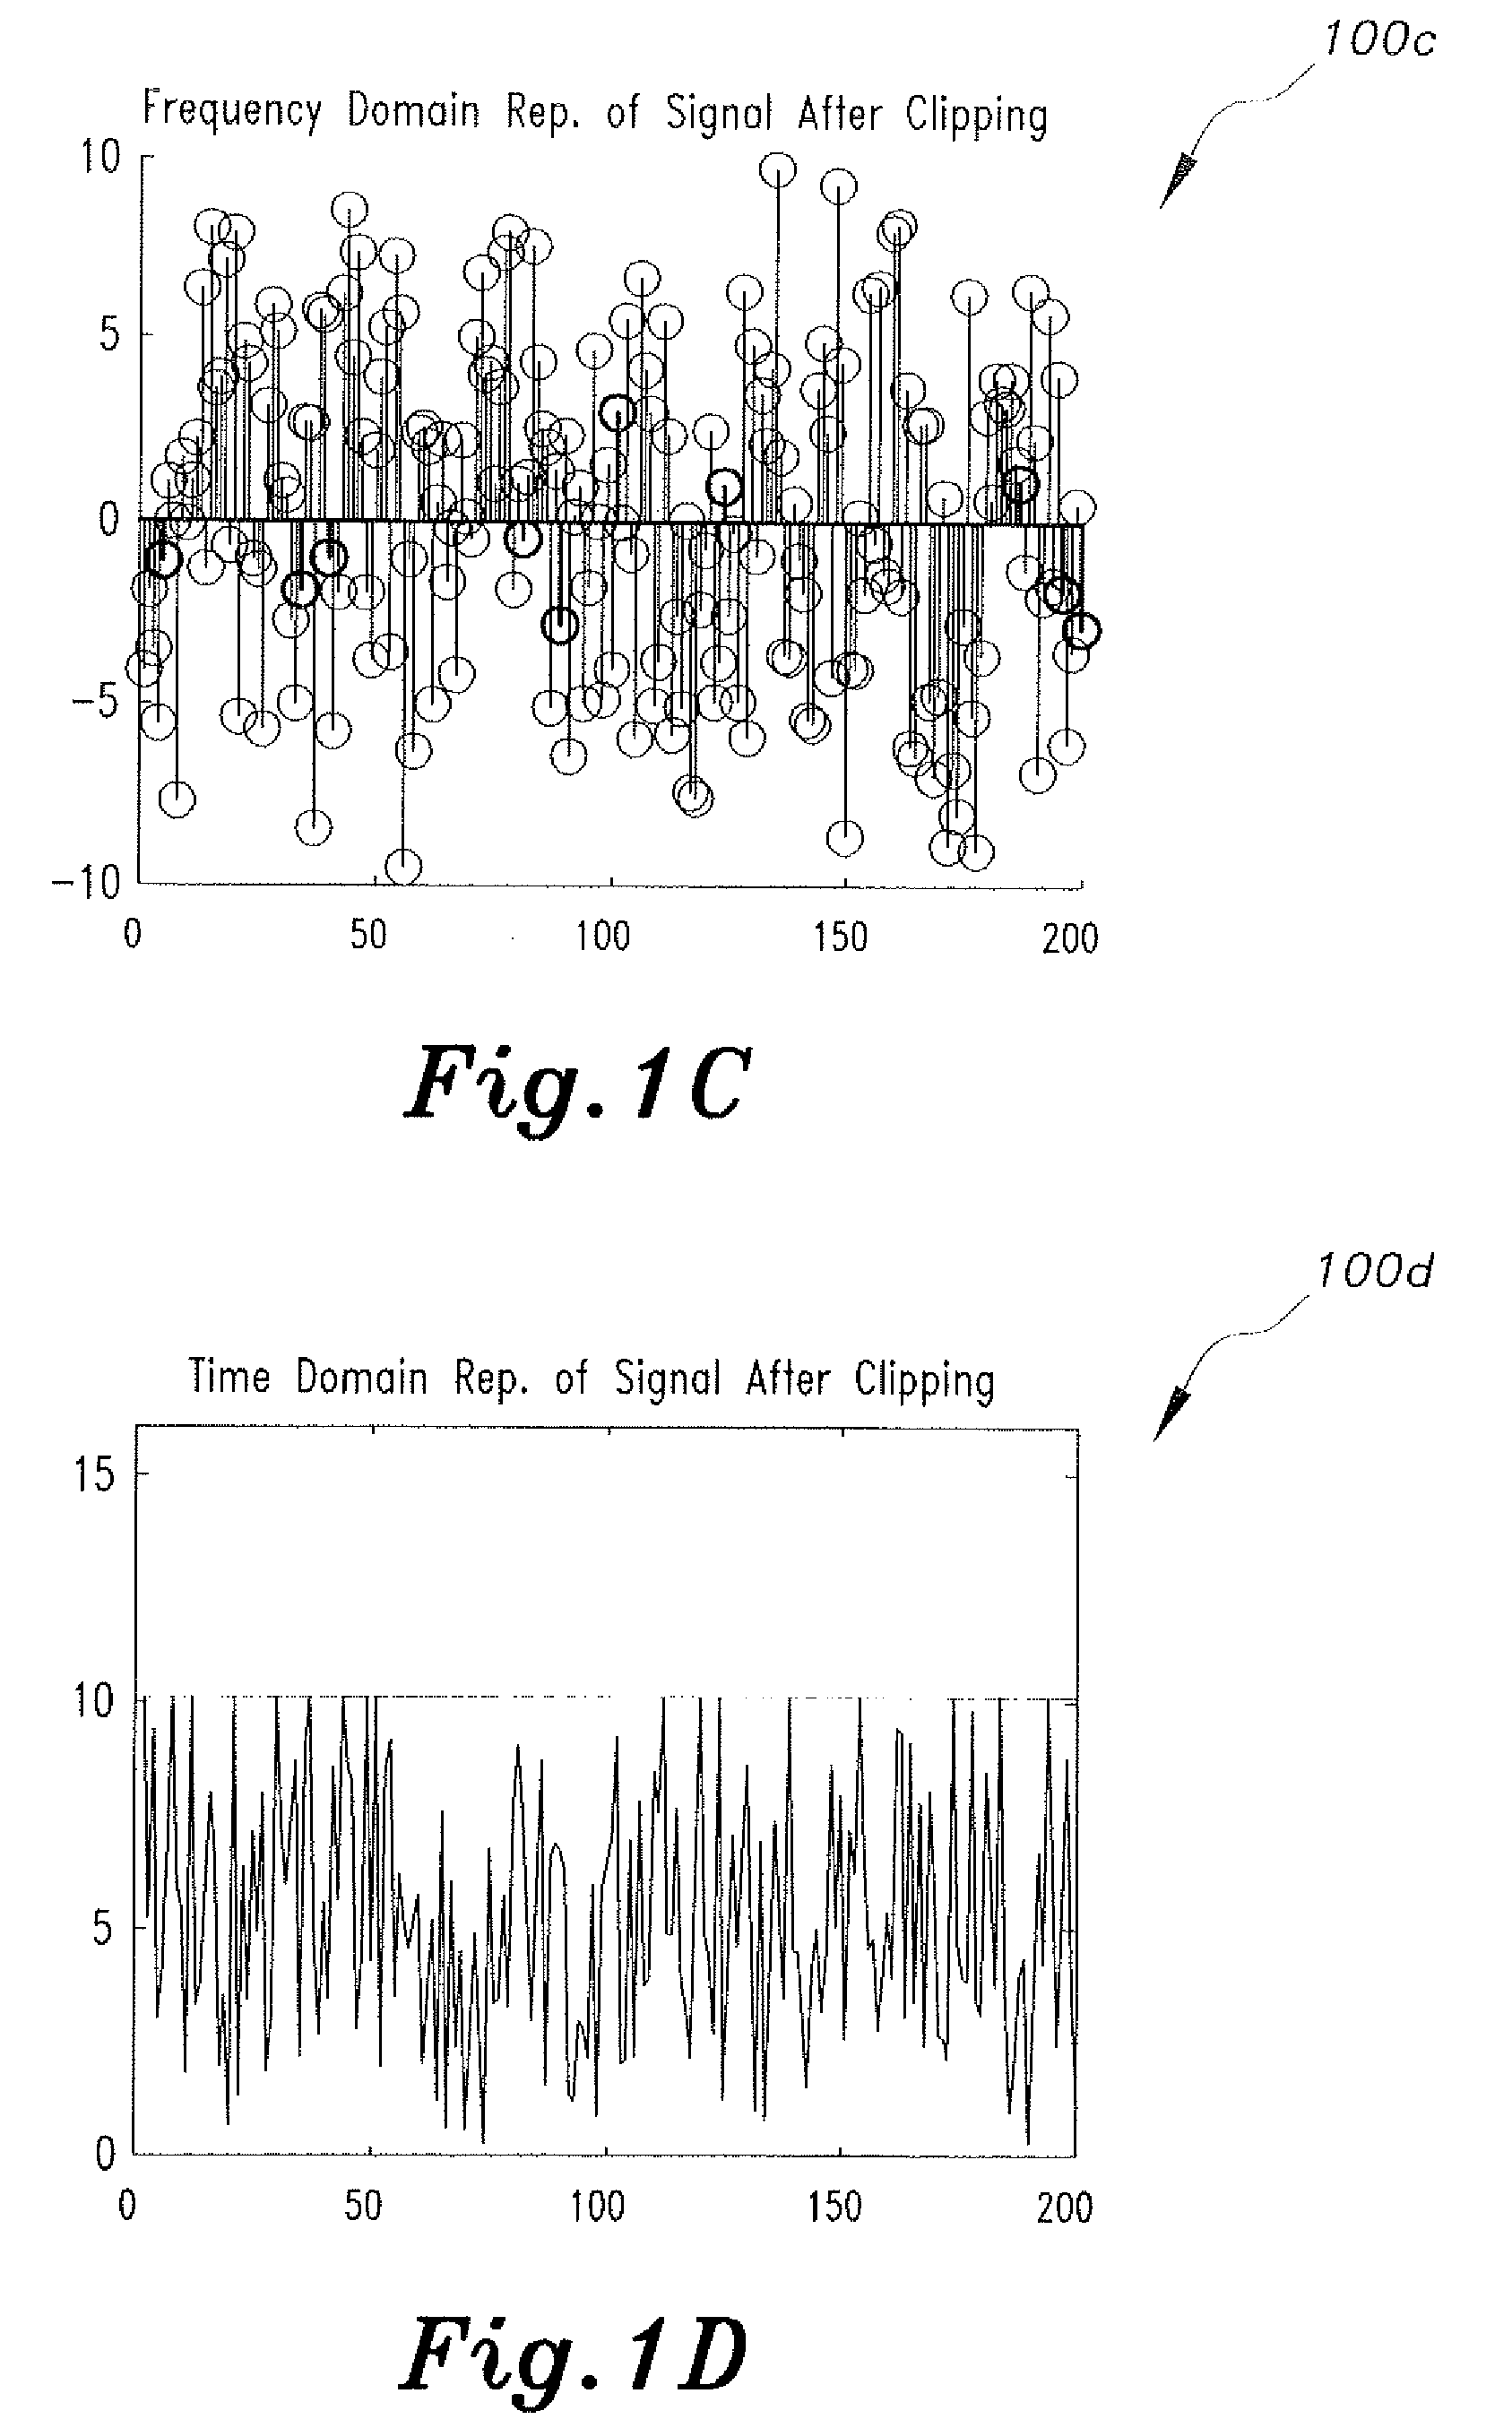 Method of performing peak reduction and clipping mitigation